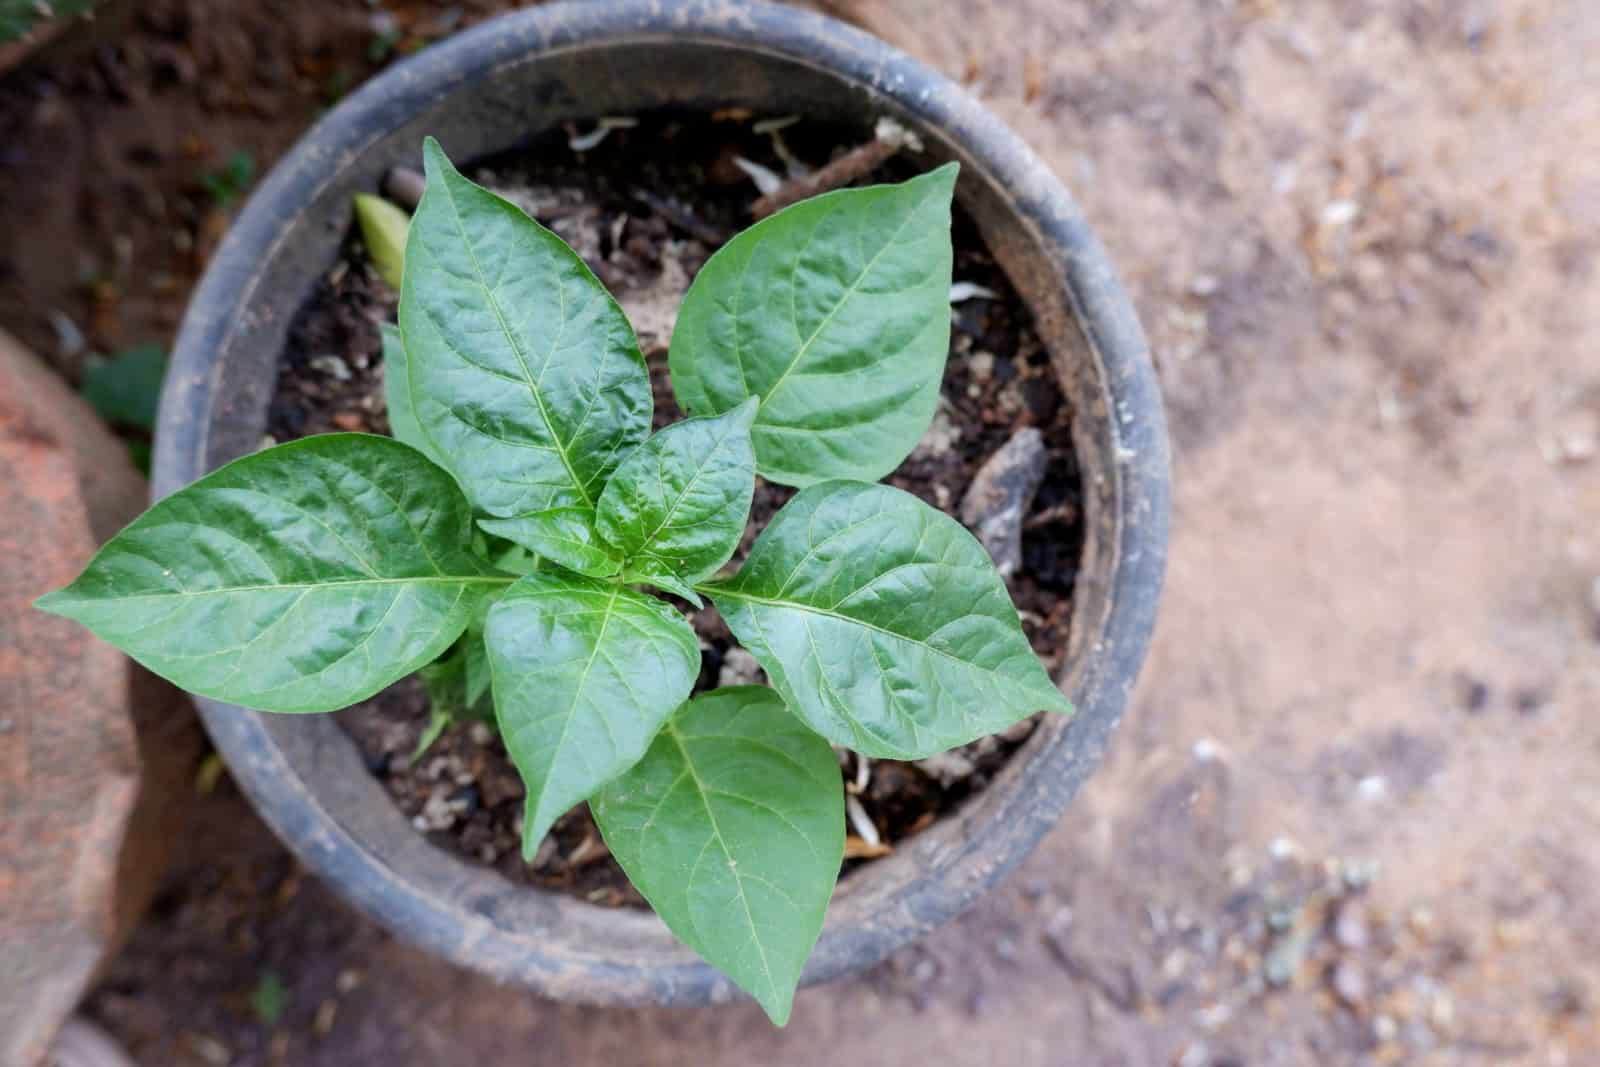 A young tropical chili peppers plant growing in a black pot in outdoor